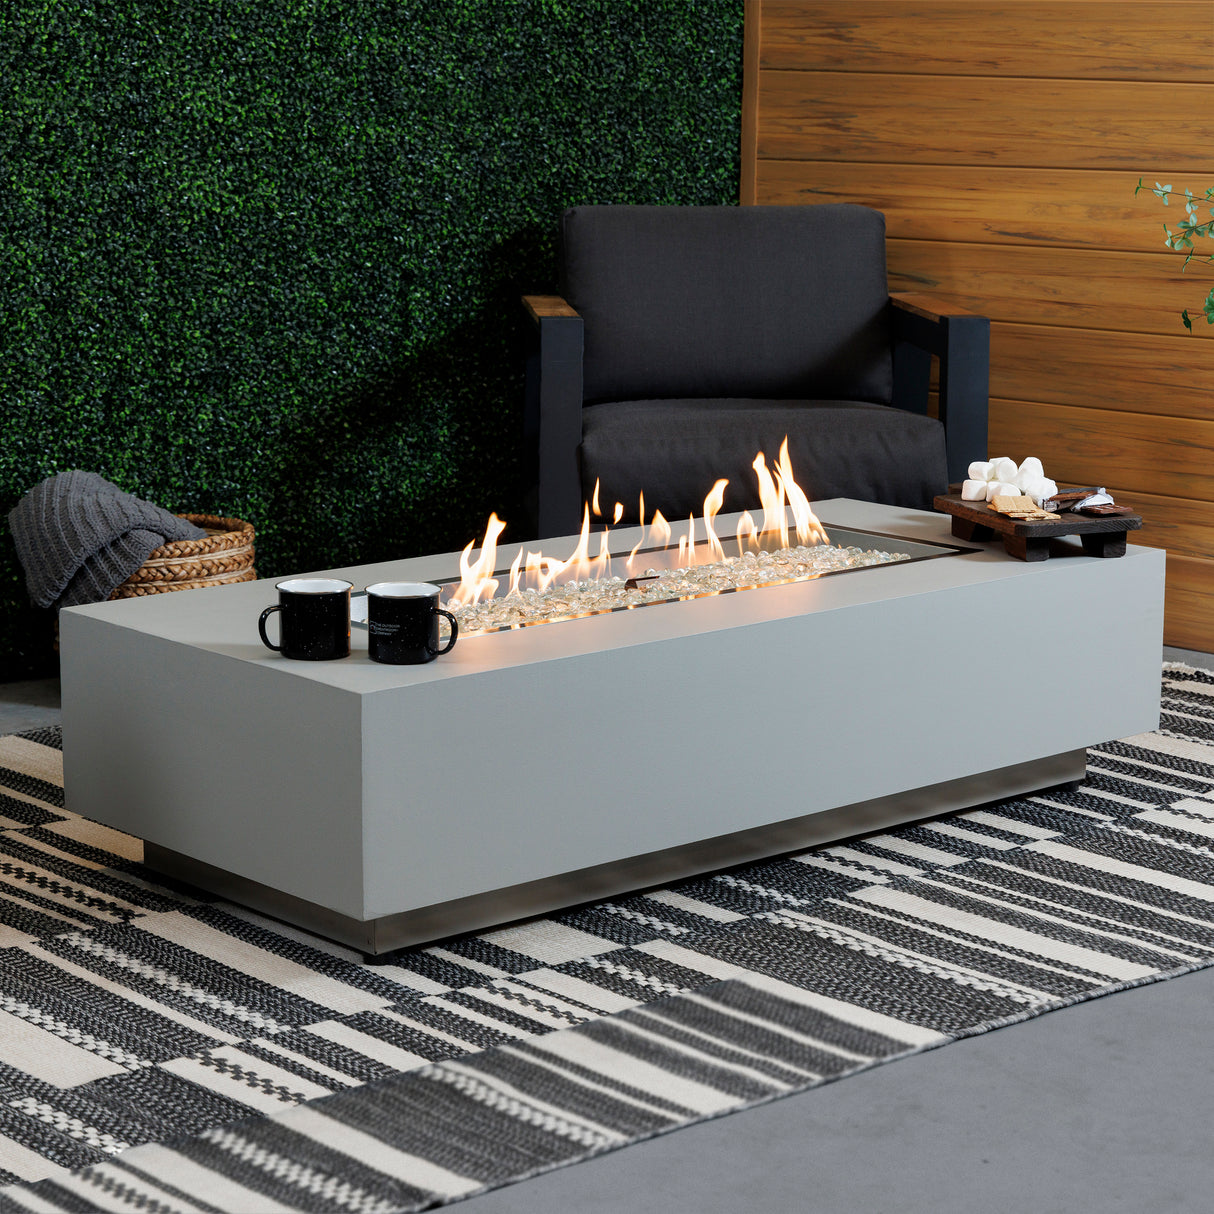 A side view of the Harbor View Rectangular Gas Fire Pit Table in a modern patio setup with food and drink on the top of the table